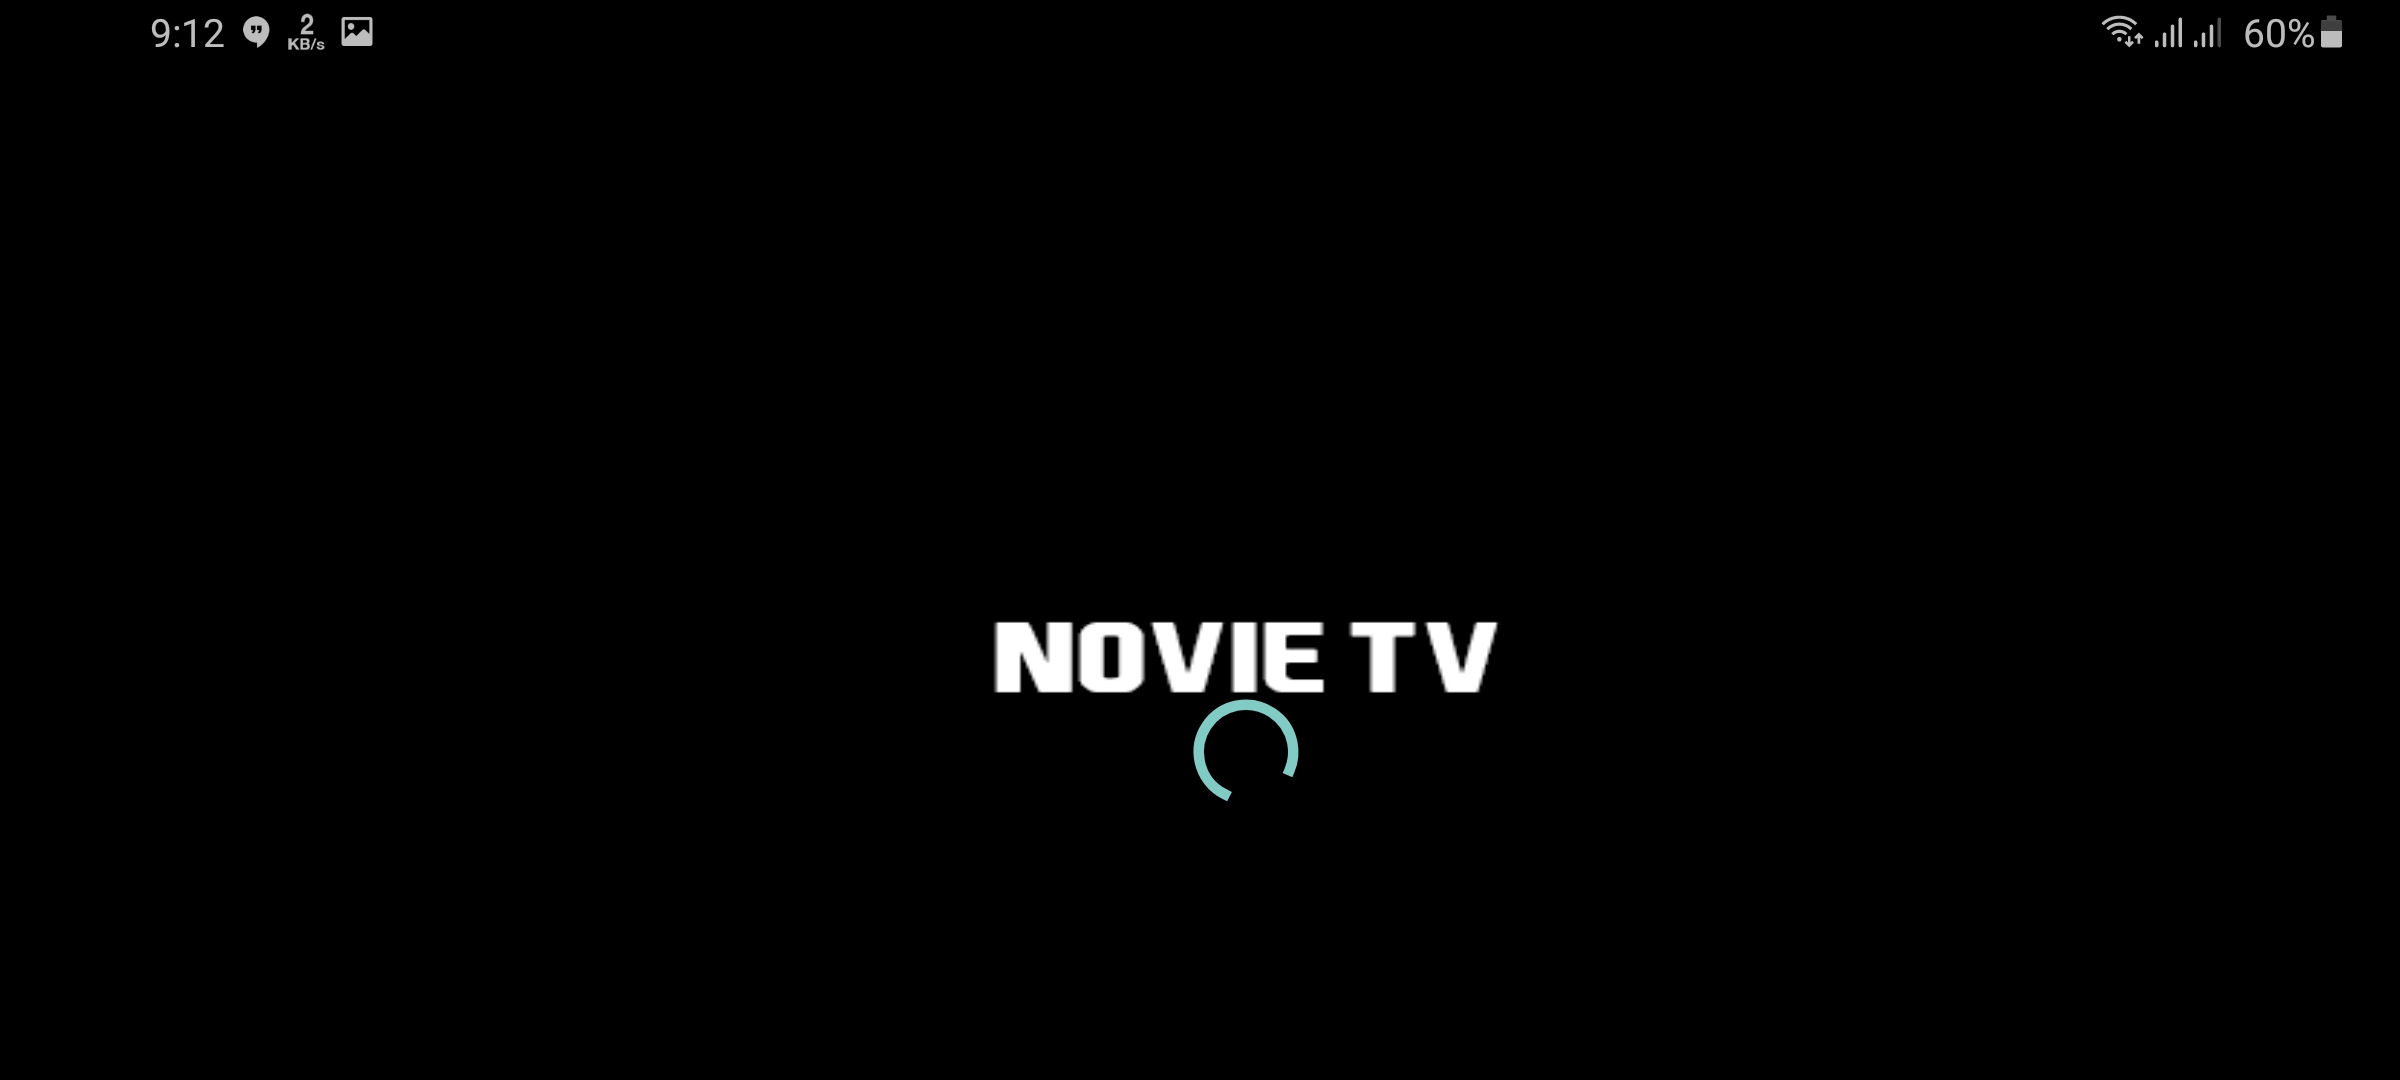 Novie TV Apk Free Download For Android | APKOLL